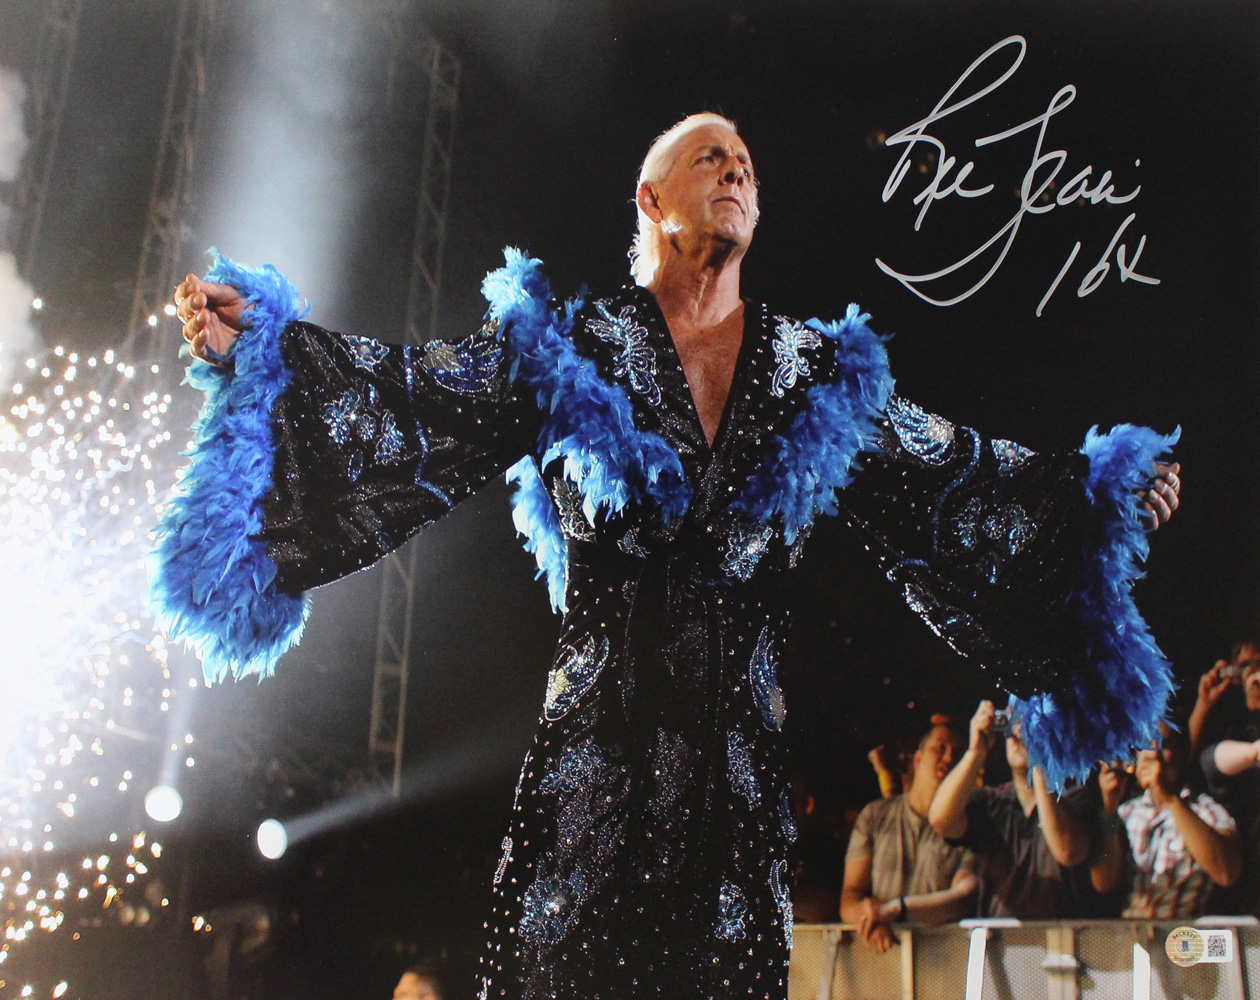 Ric Flair Autographed/Signed Wrestling 16x20 Photo Beckett